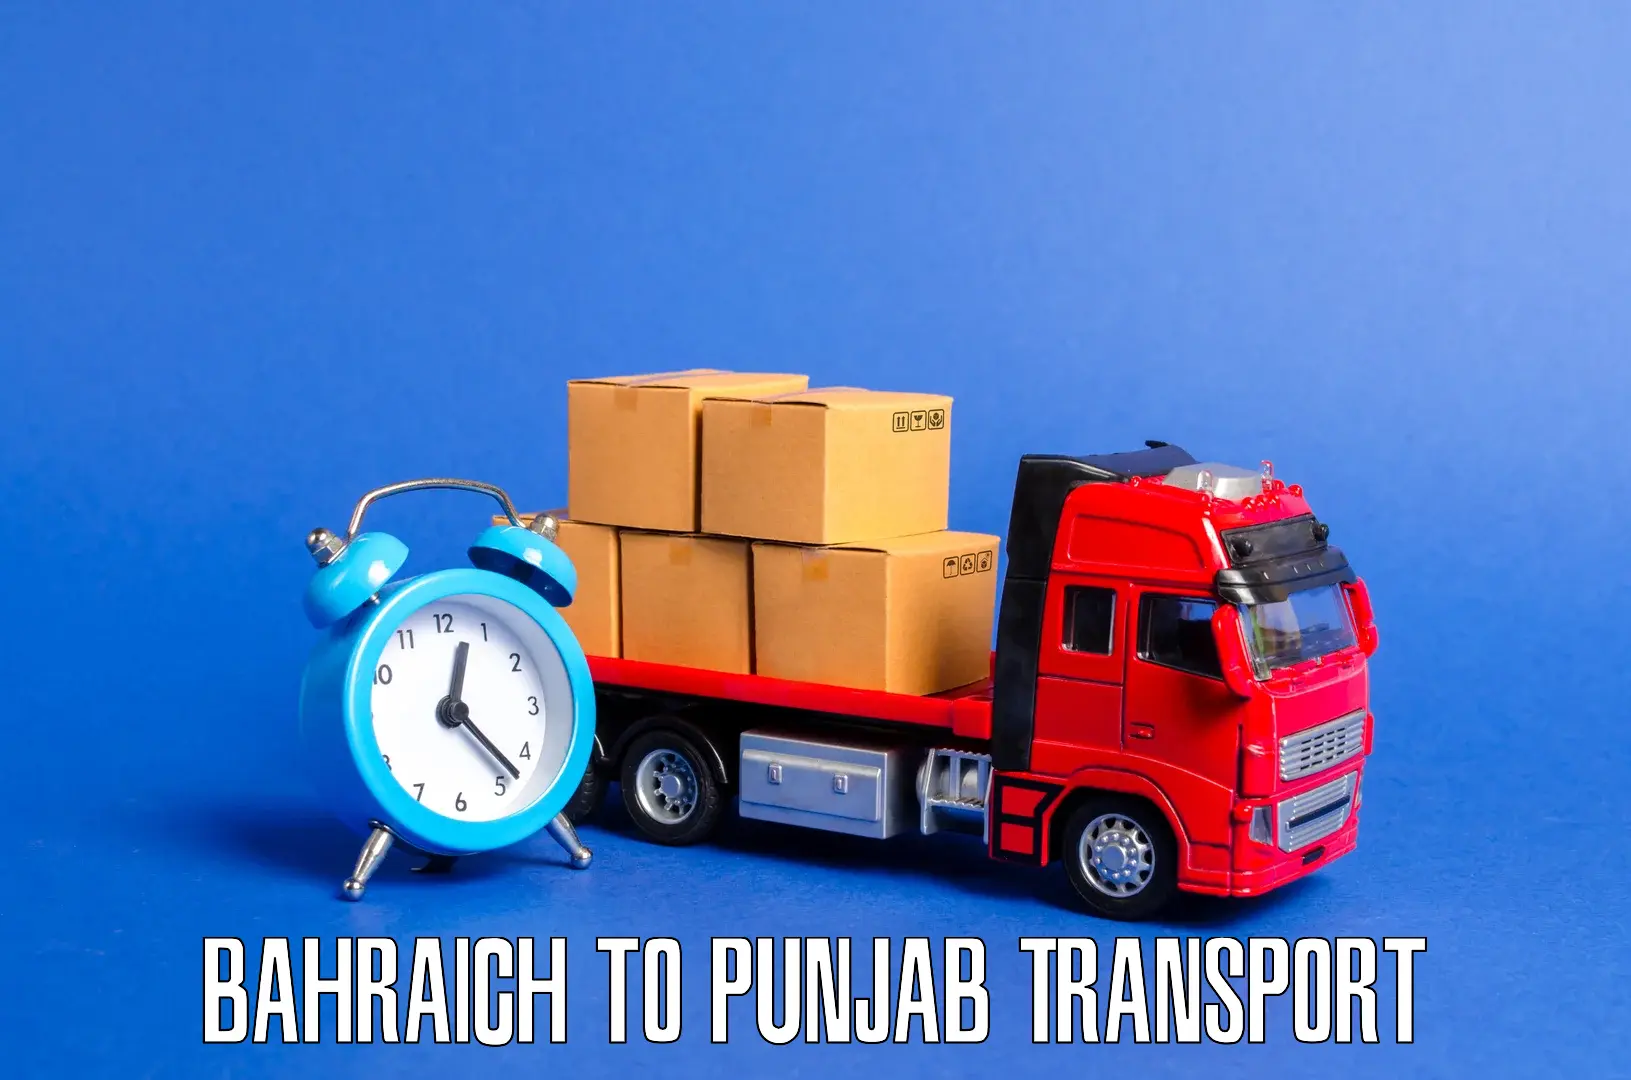 Commercial transport service Bahraich to Mohali